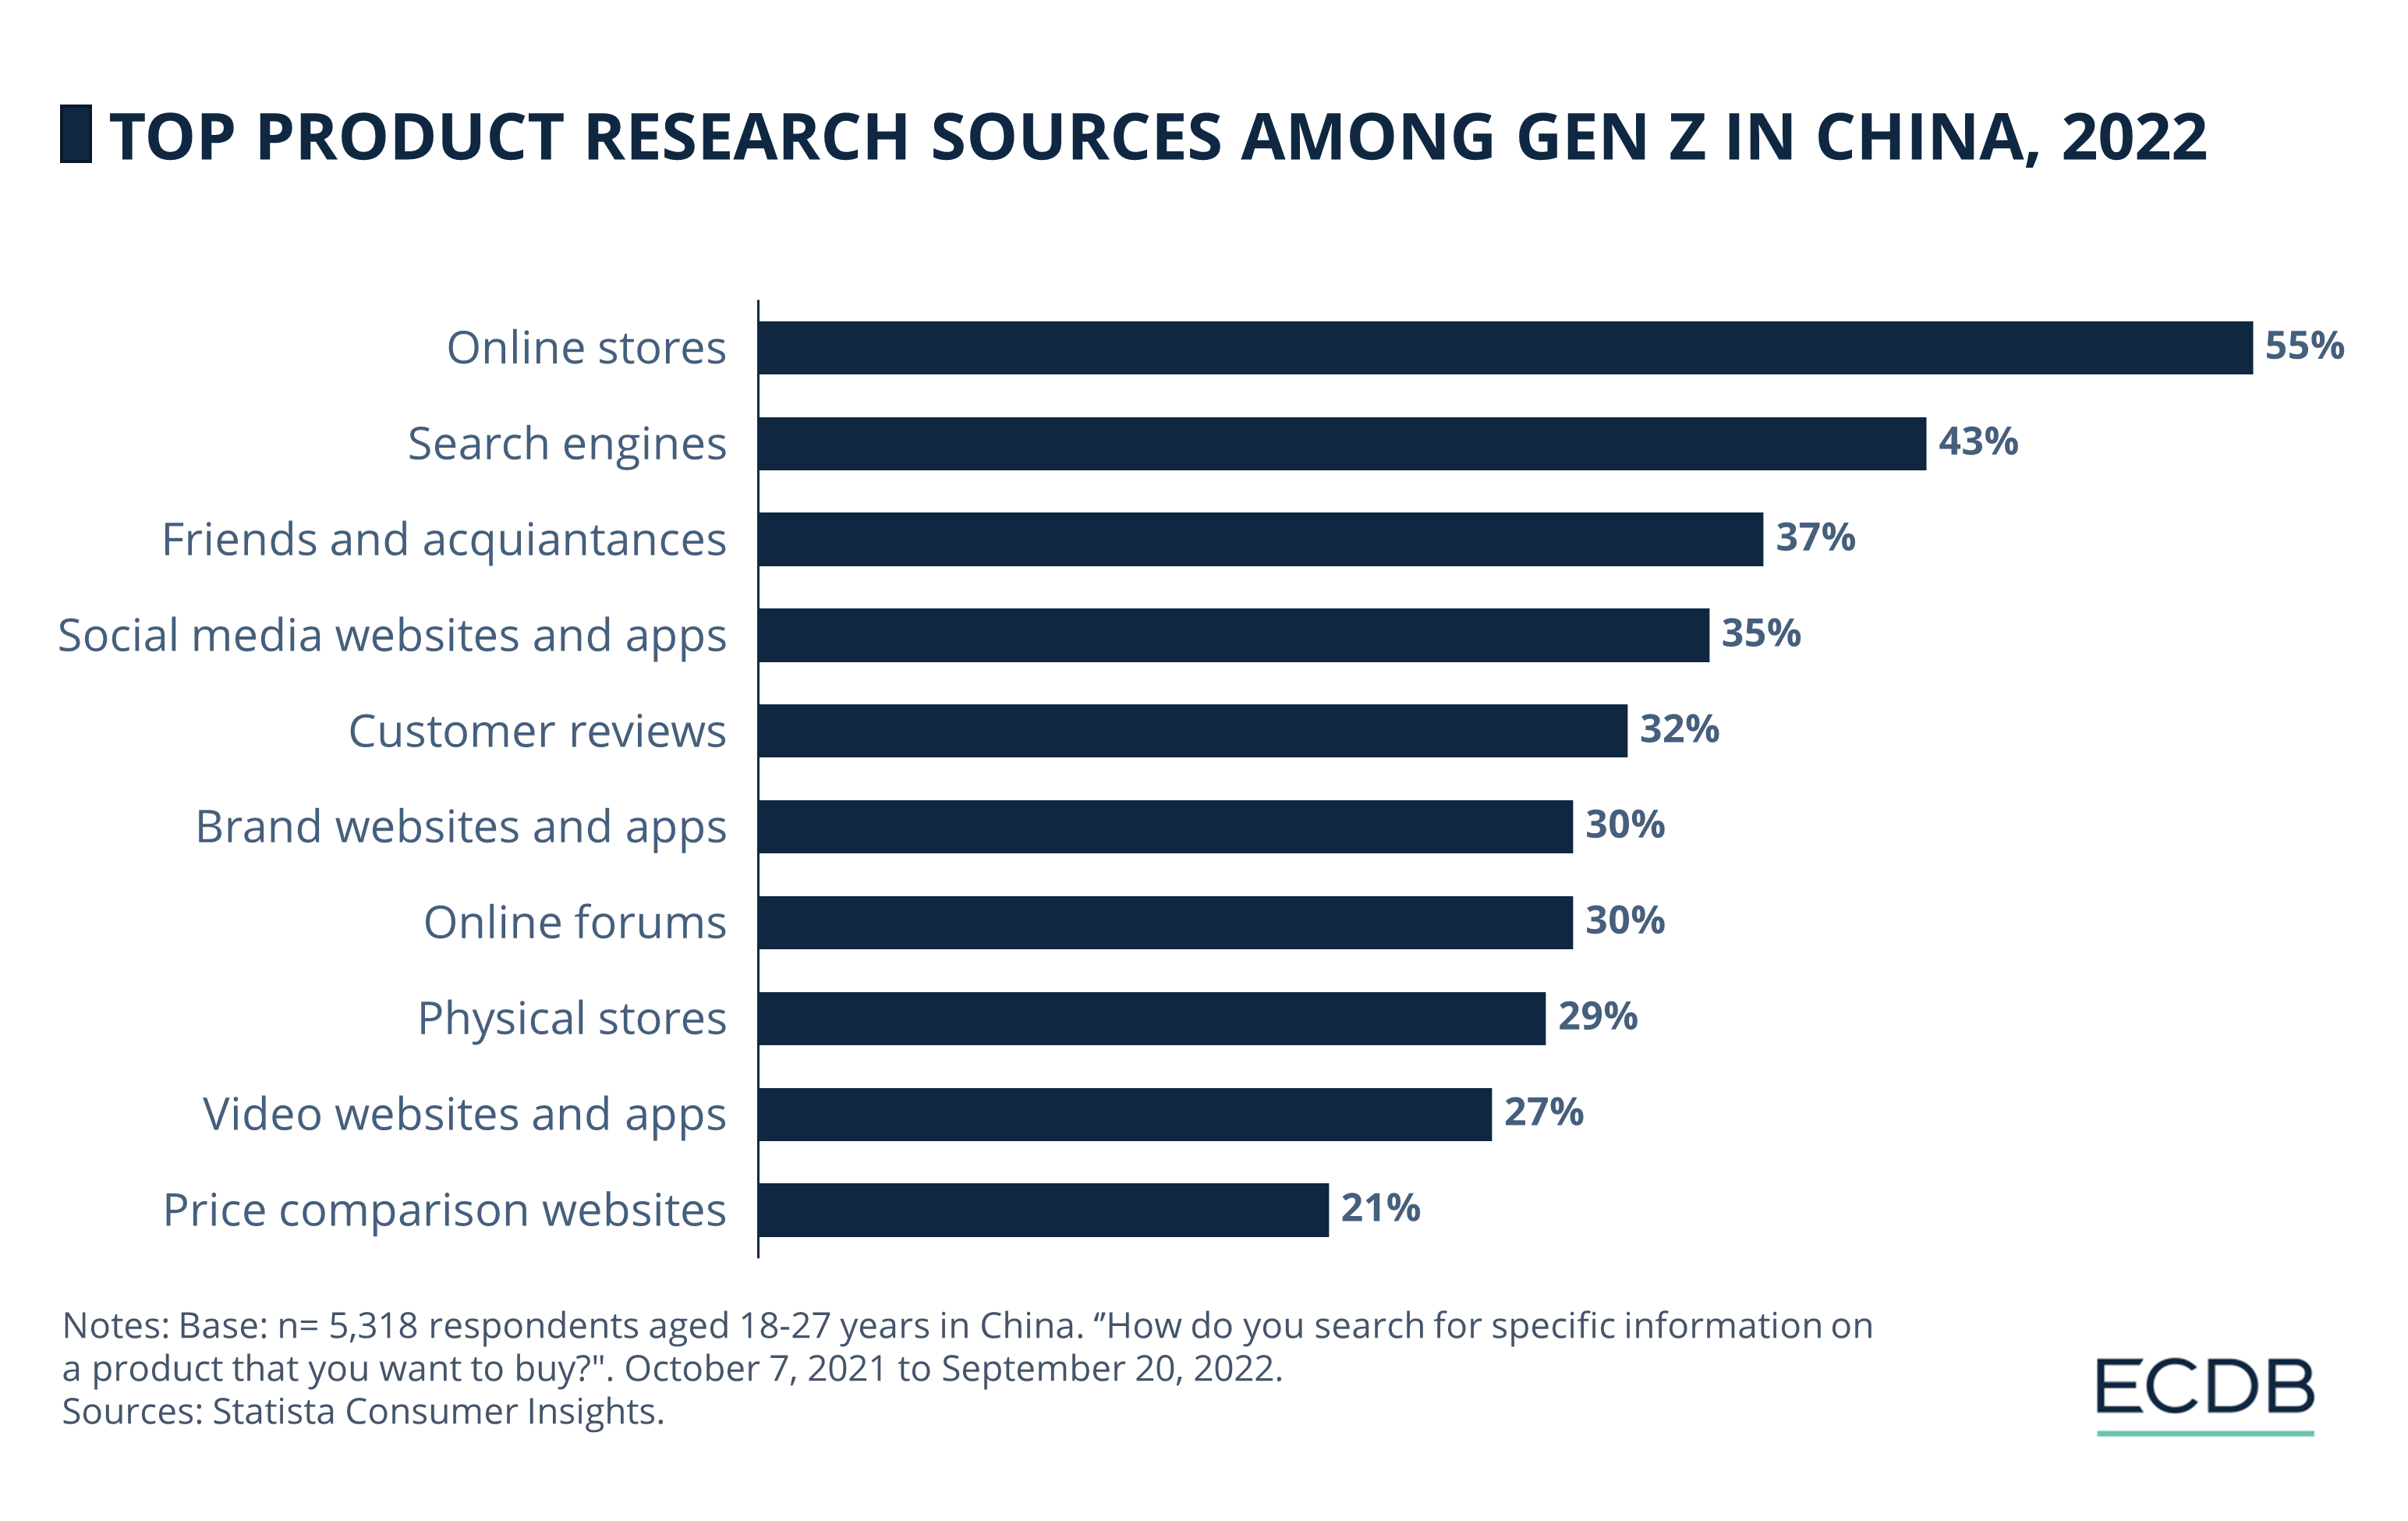 Top Product Research Sources Among Gen Z in China, 2022